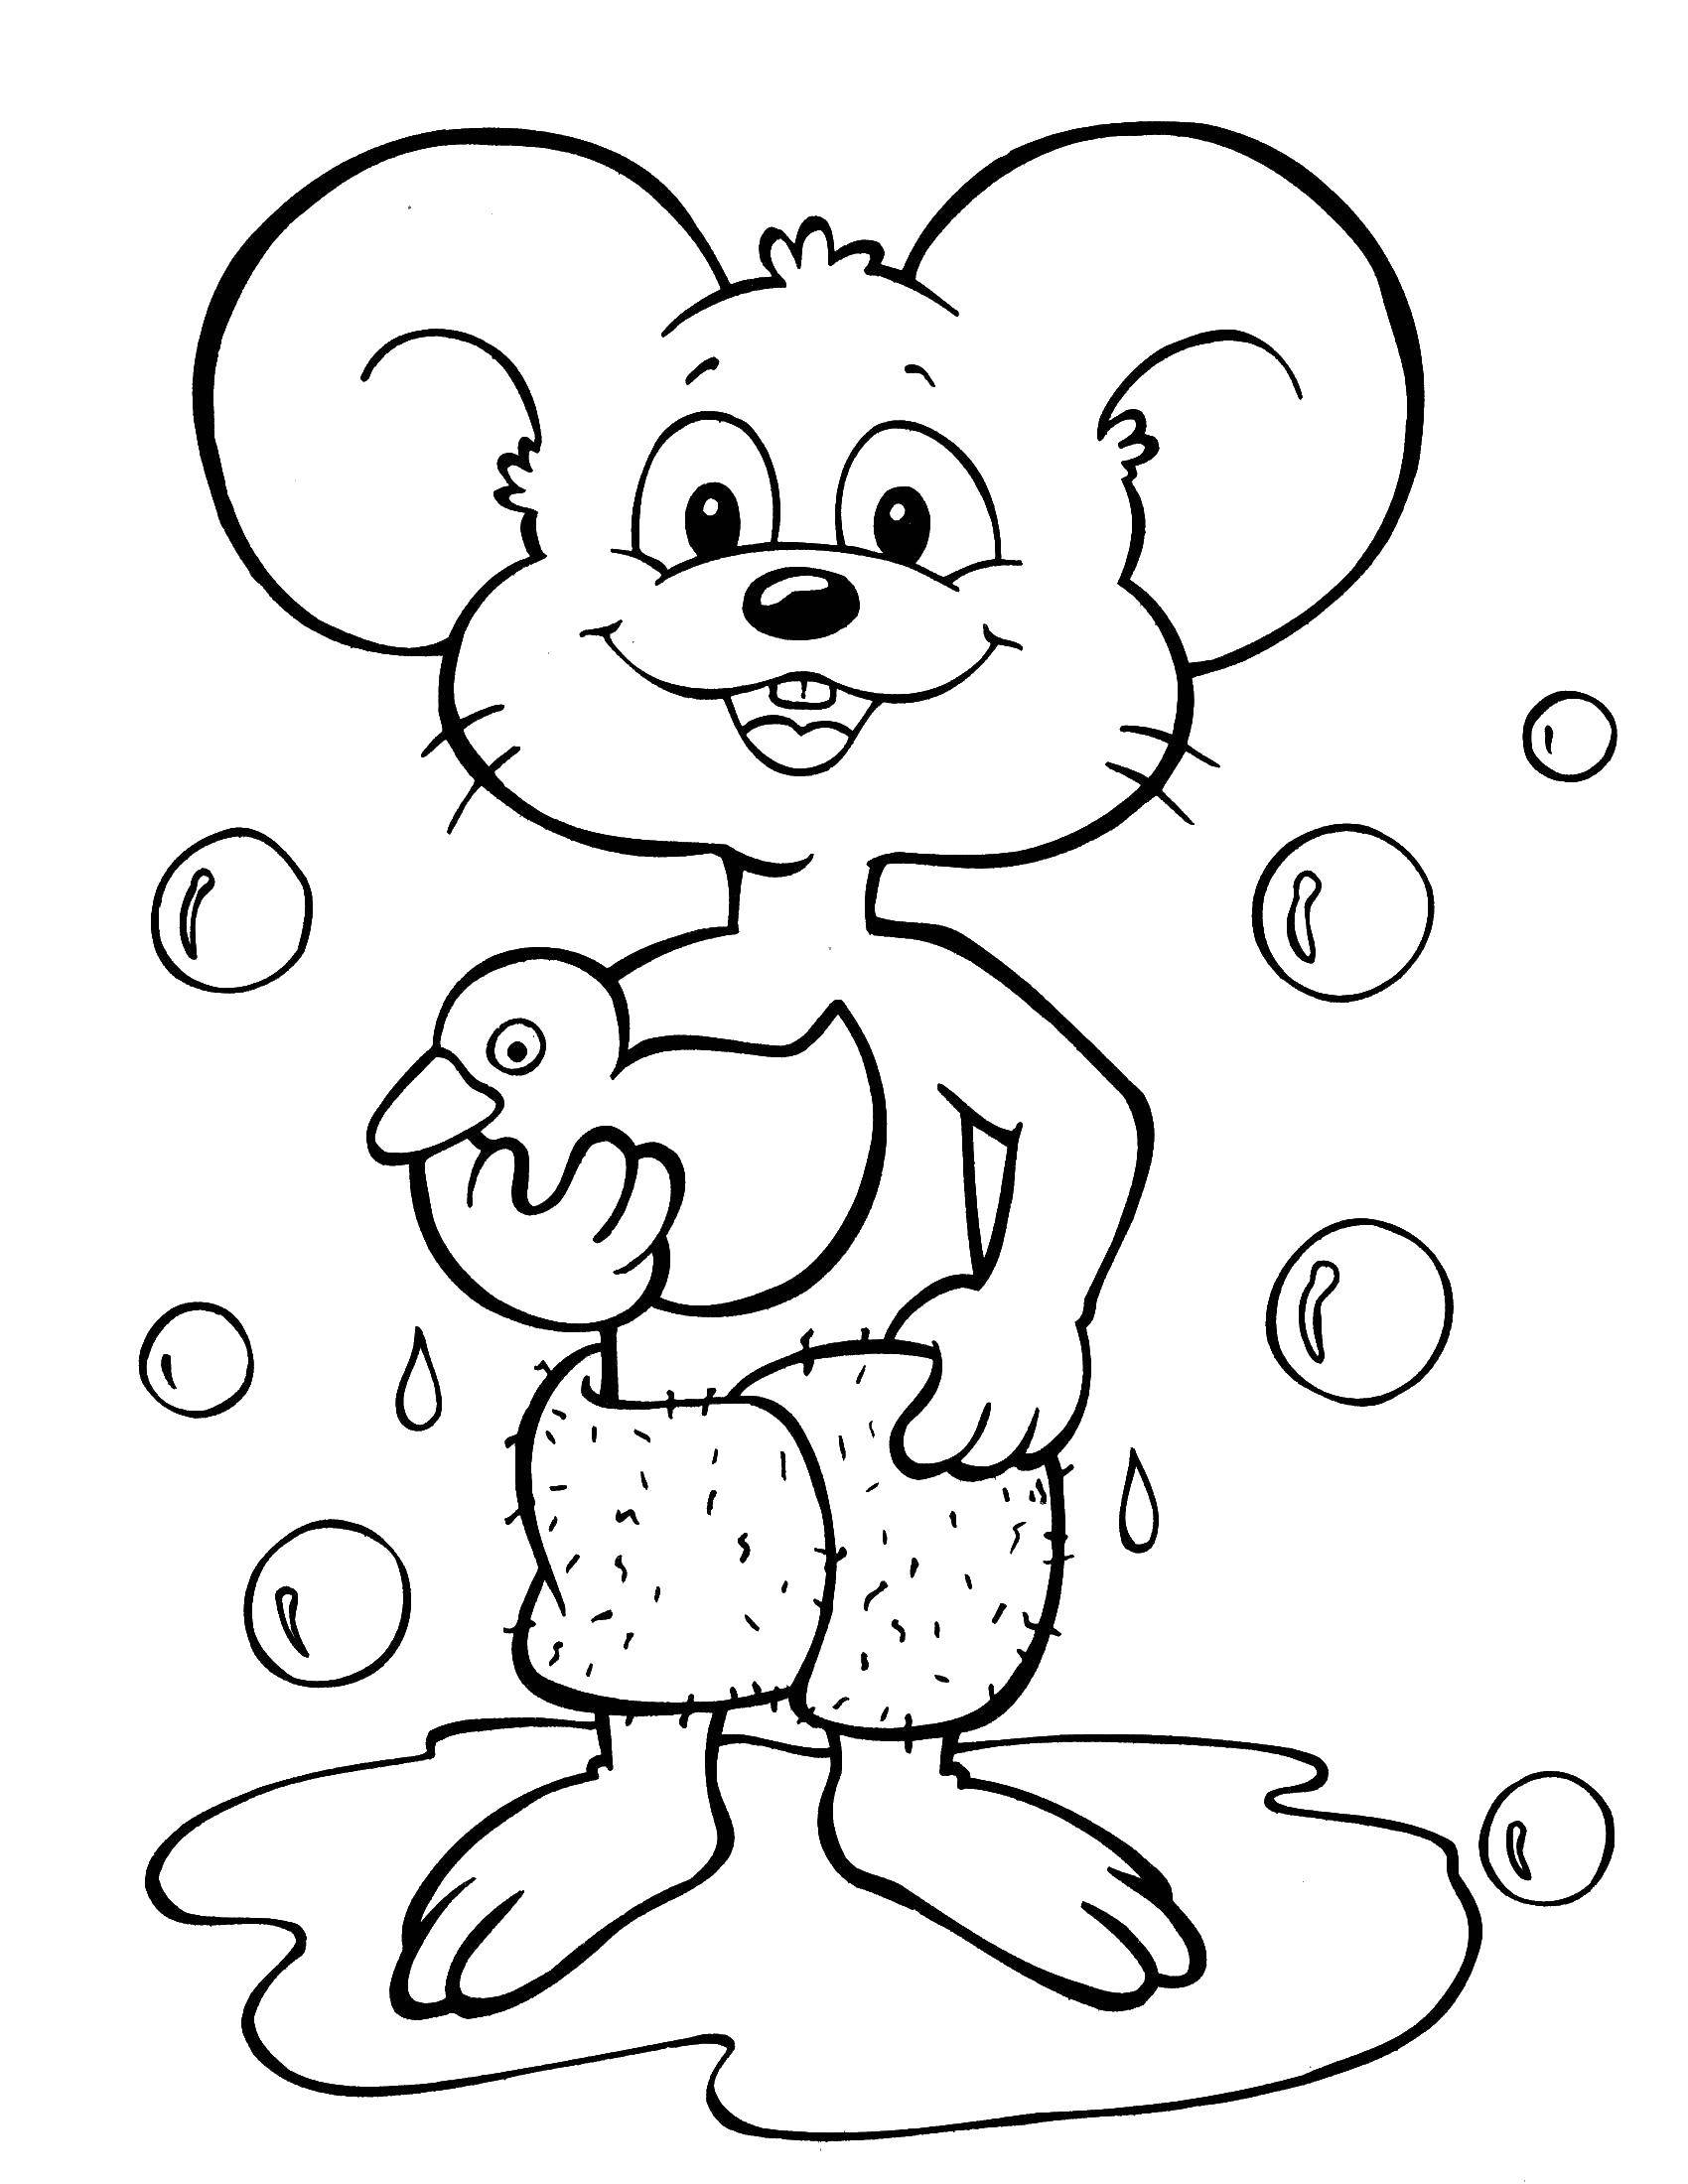 Coloring Mouse out of the shower. Category Animals. Tags:  the mouse, duck, shower.